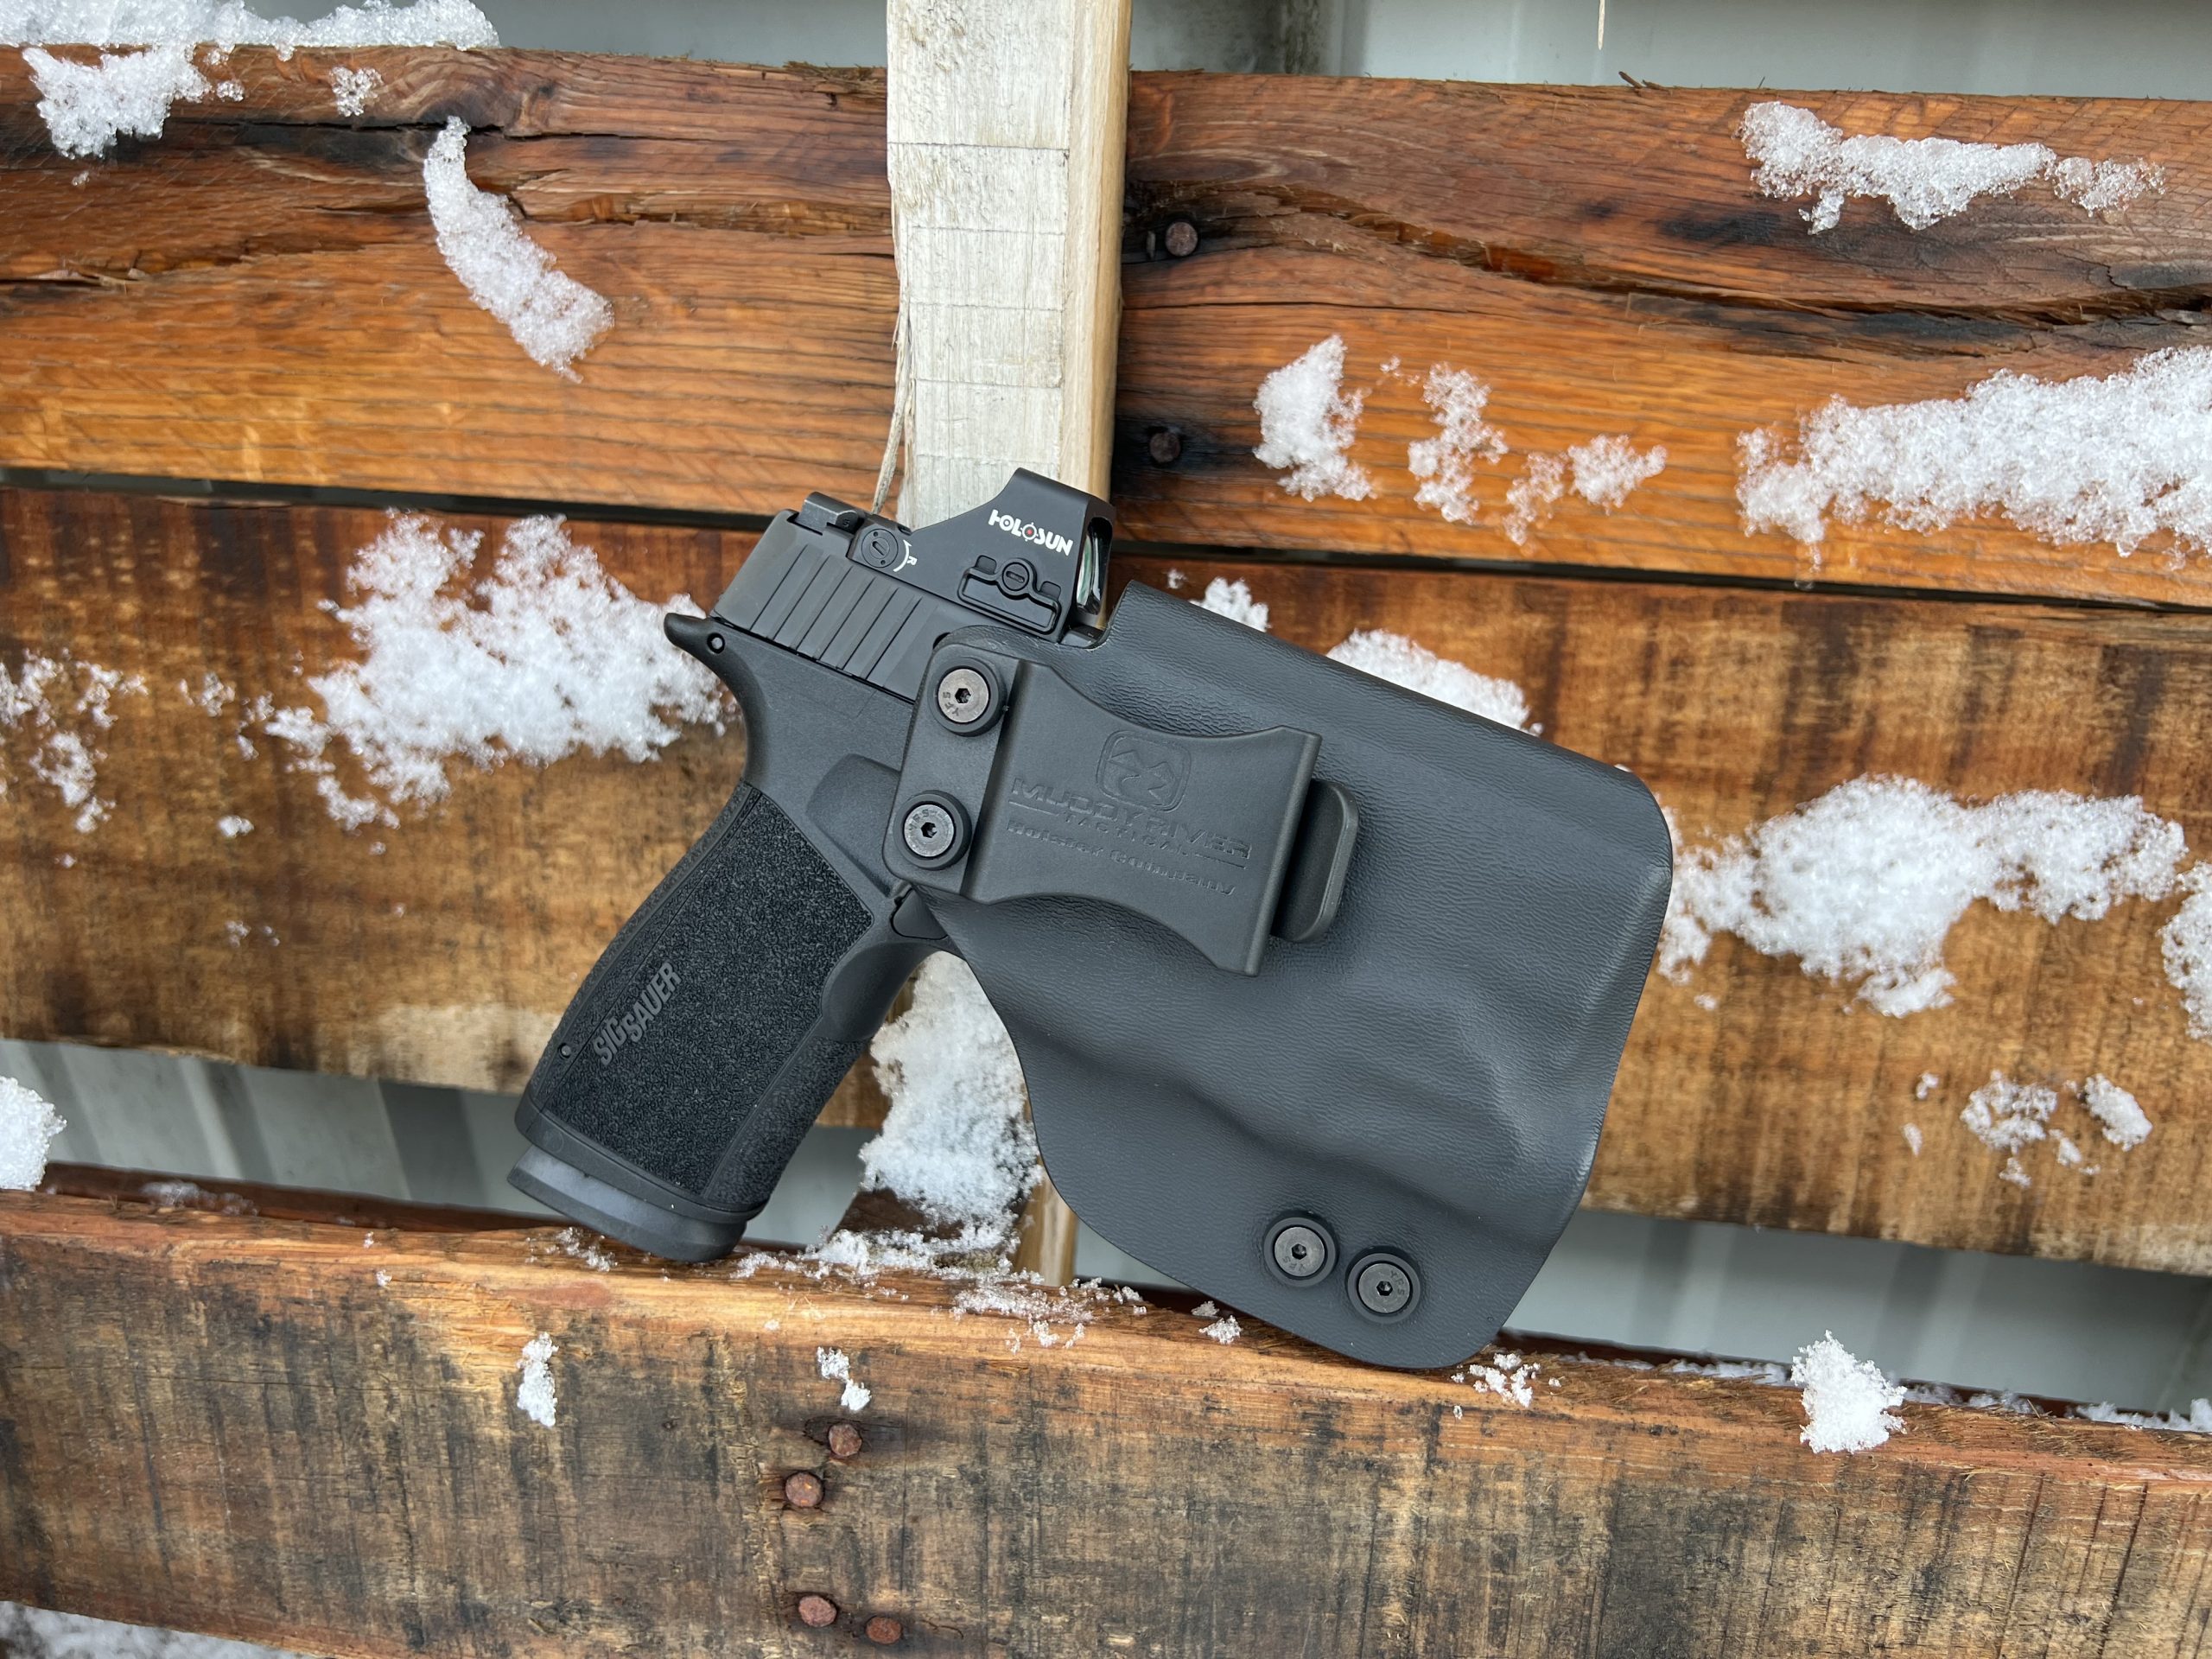 Sig SP2022 IWB Holster  Purchase a Sig Sauer SP2022 IWB Holster